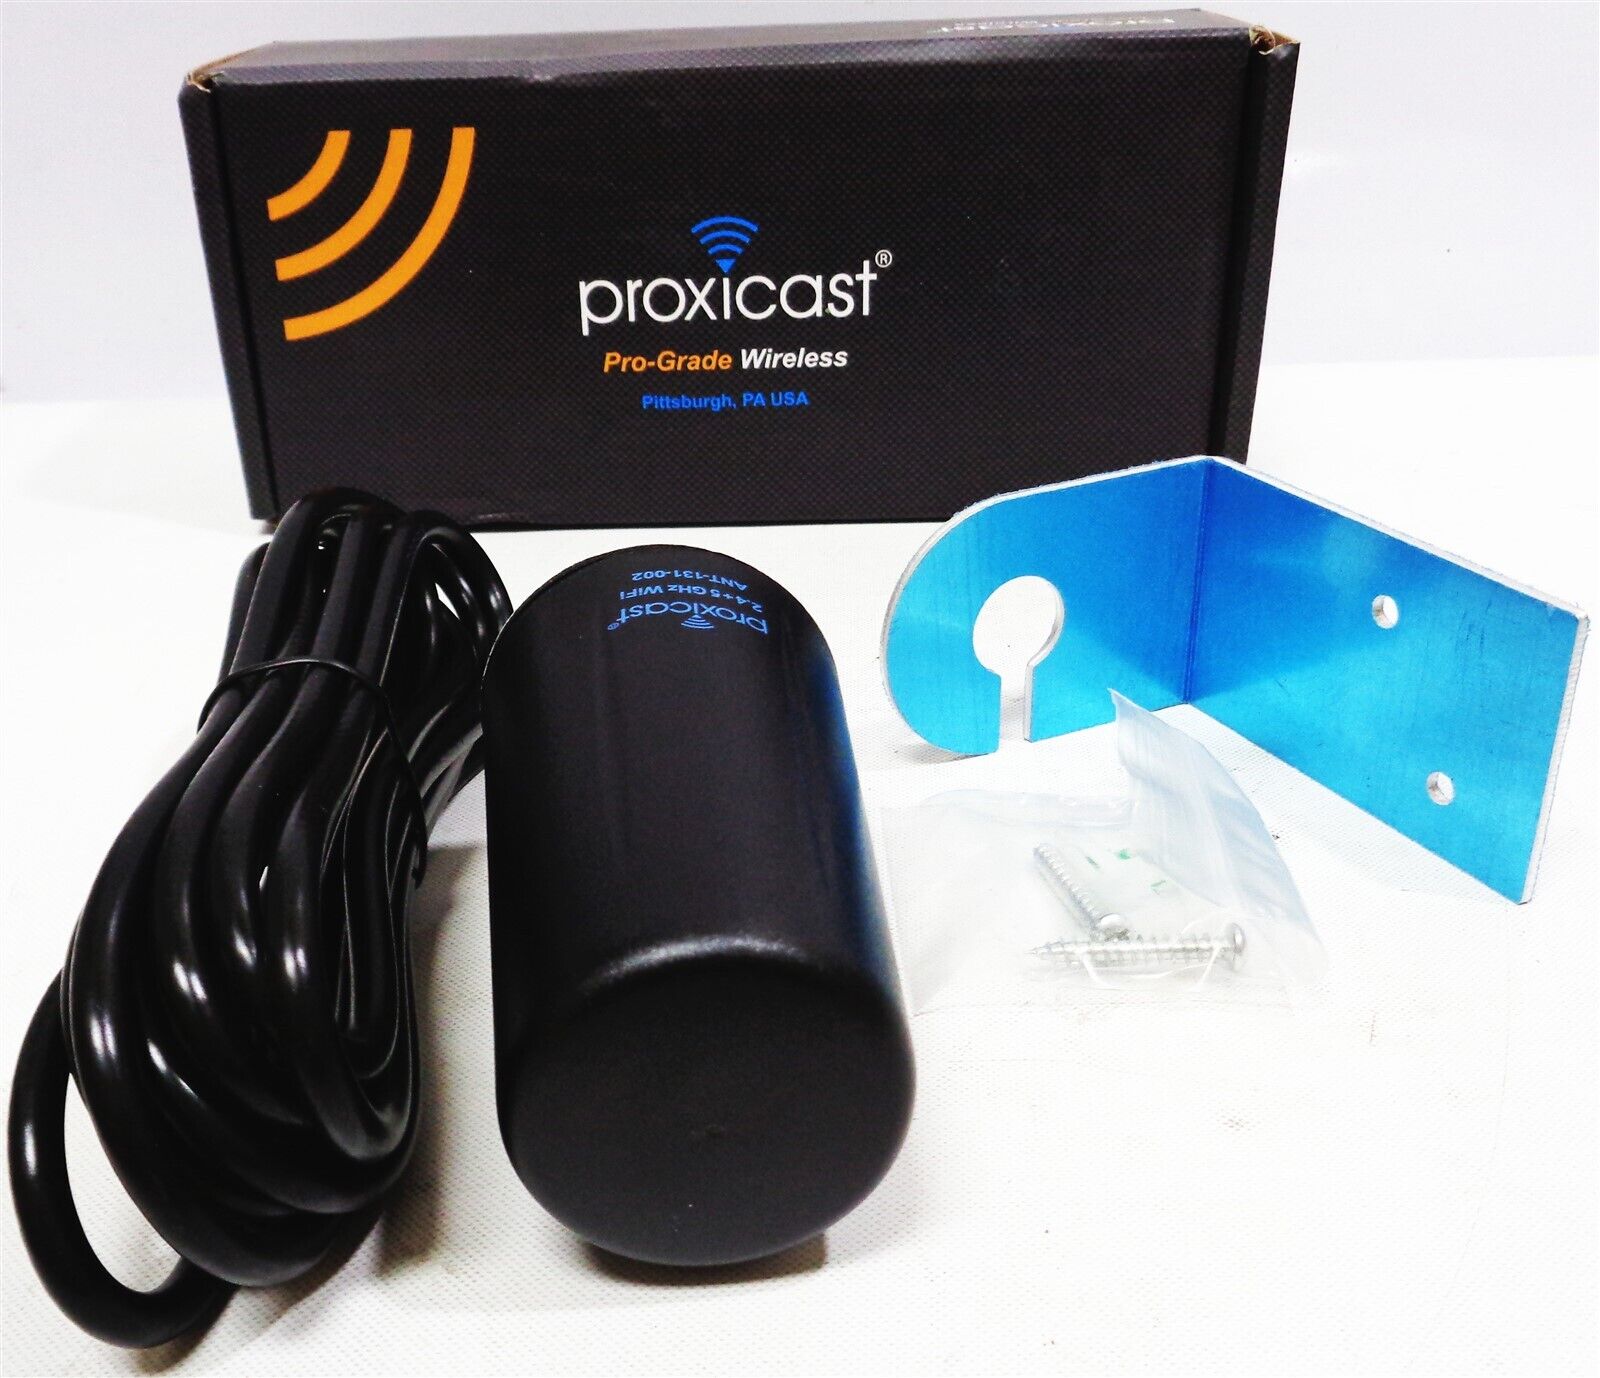 Proxicast ANT-131-002 Low Profile Dual Band 2.4/5GHz Wi-Fi Antenna Vandal-Resist